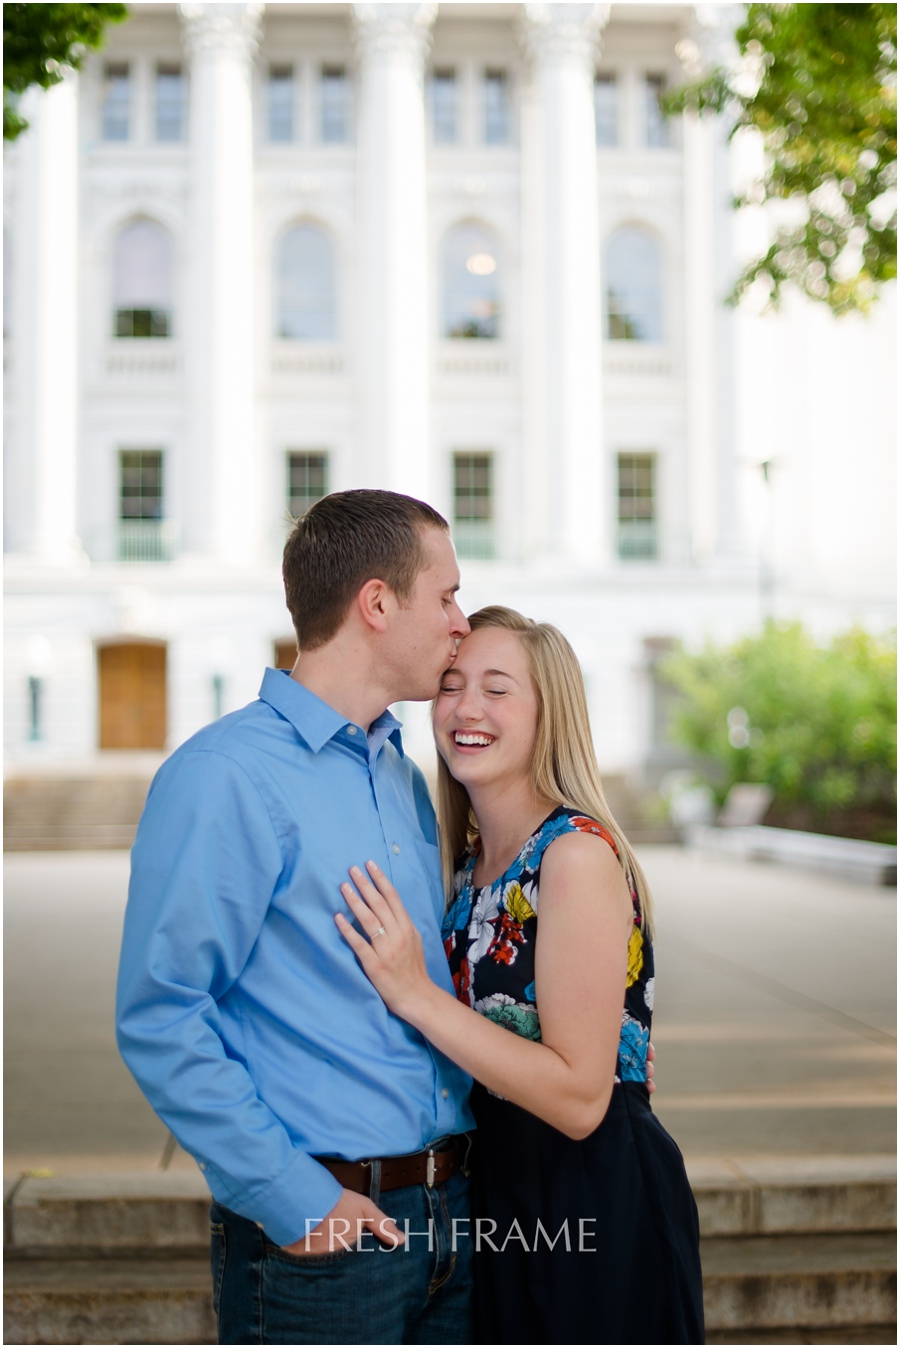 Laura & Brian – Madison Wisconsin Engagement Photography